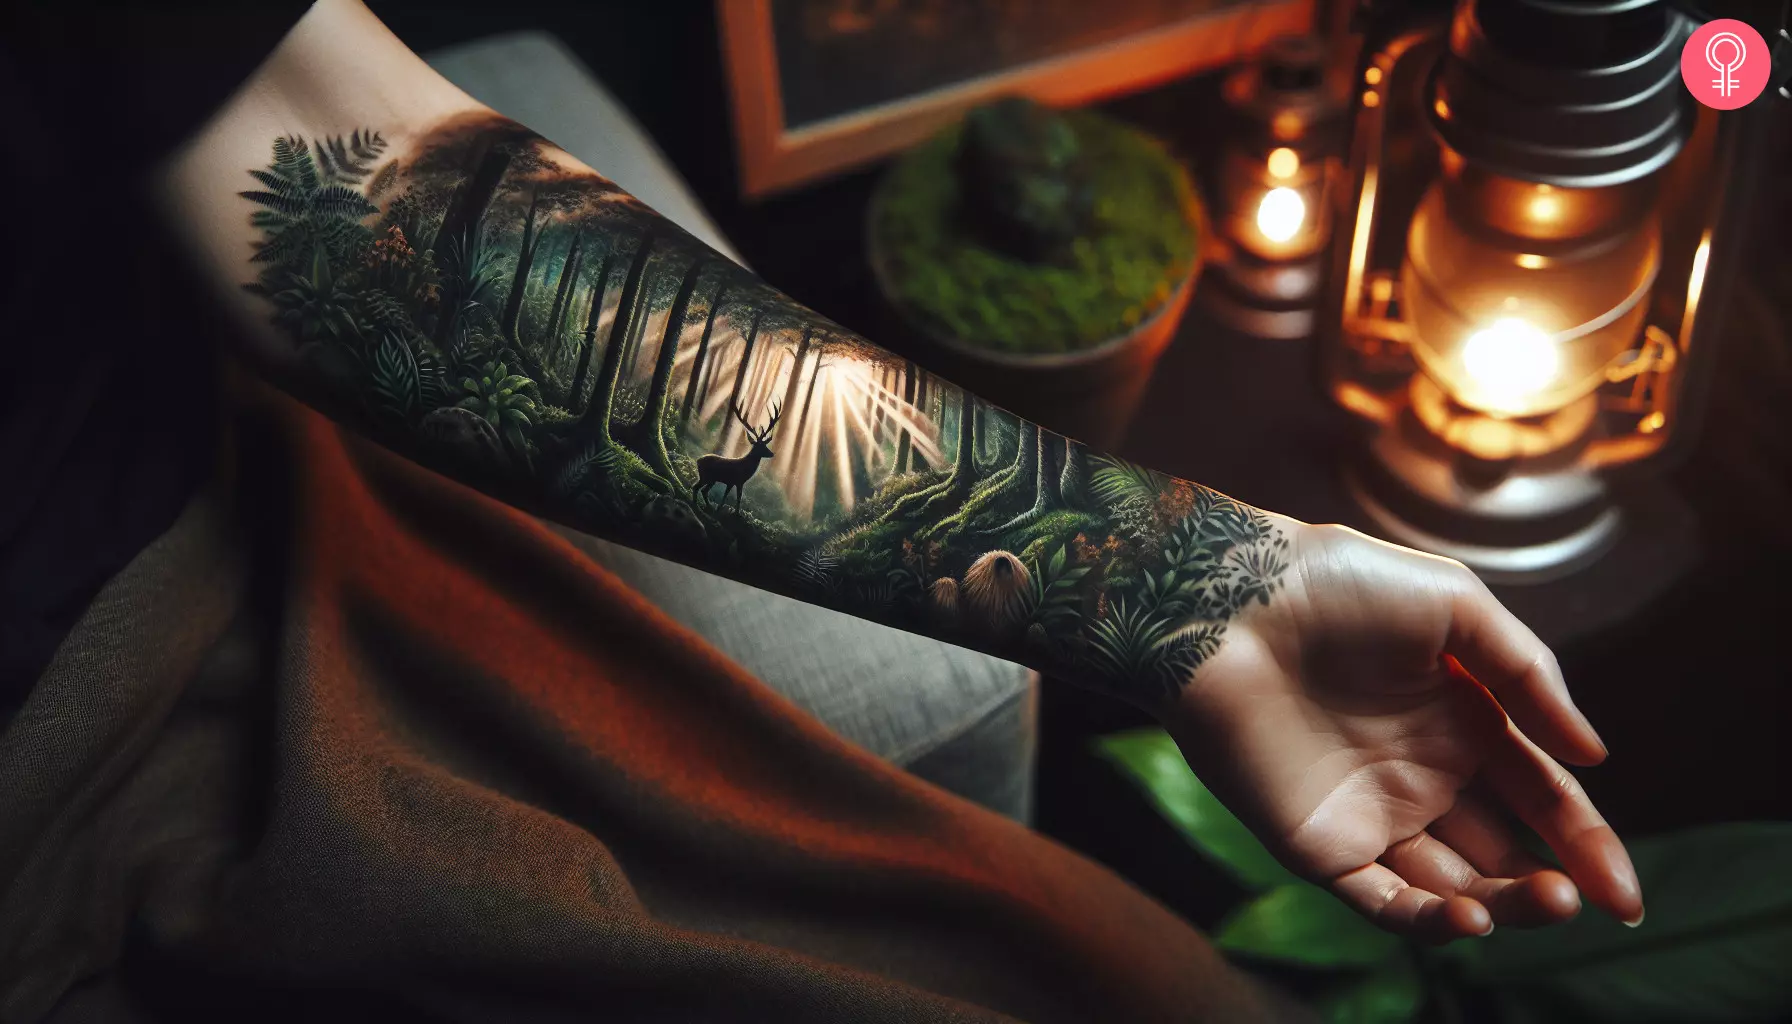 A forest tattoo design on the forearm of a woman